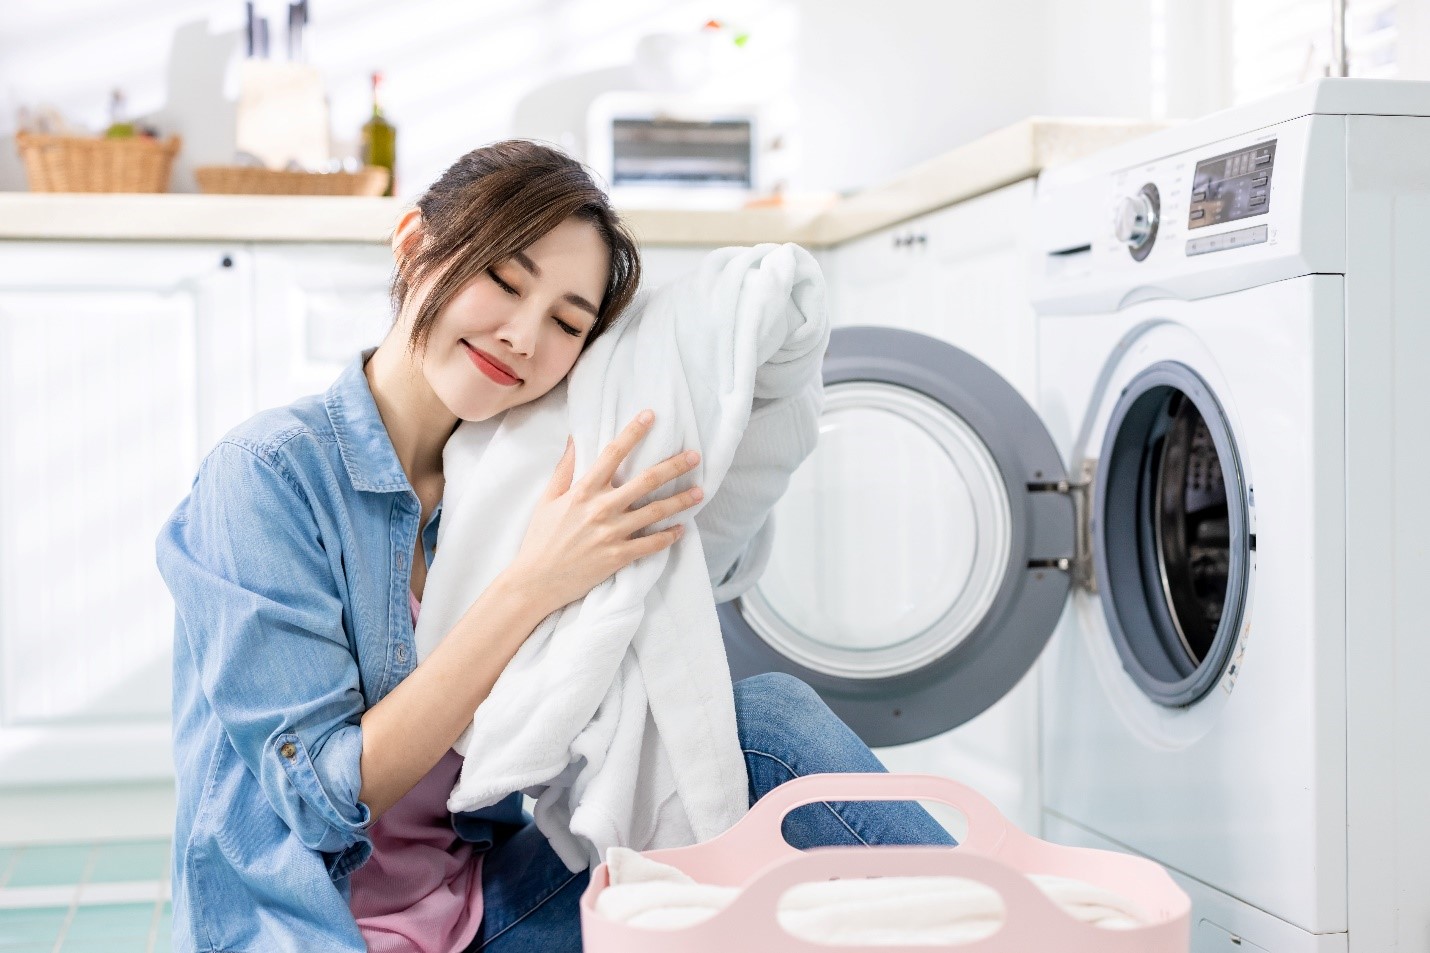 How To Dry Delicate Laundry Quickly Without Wringing It Out